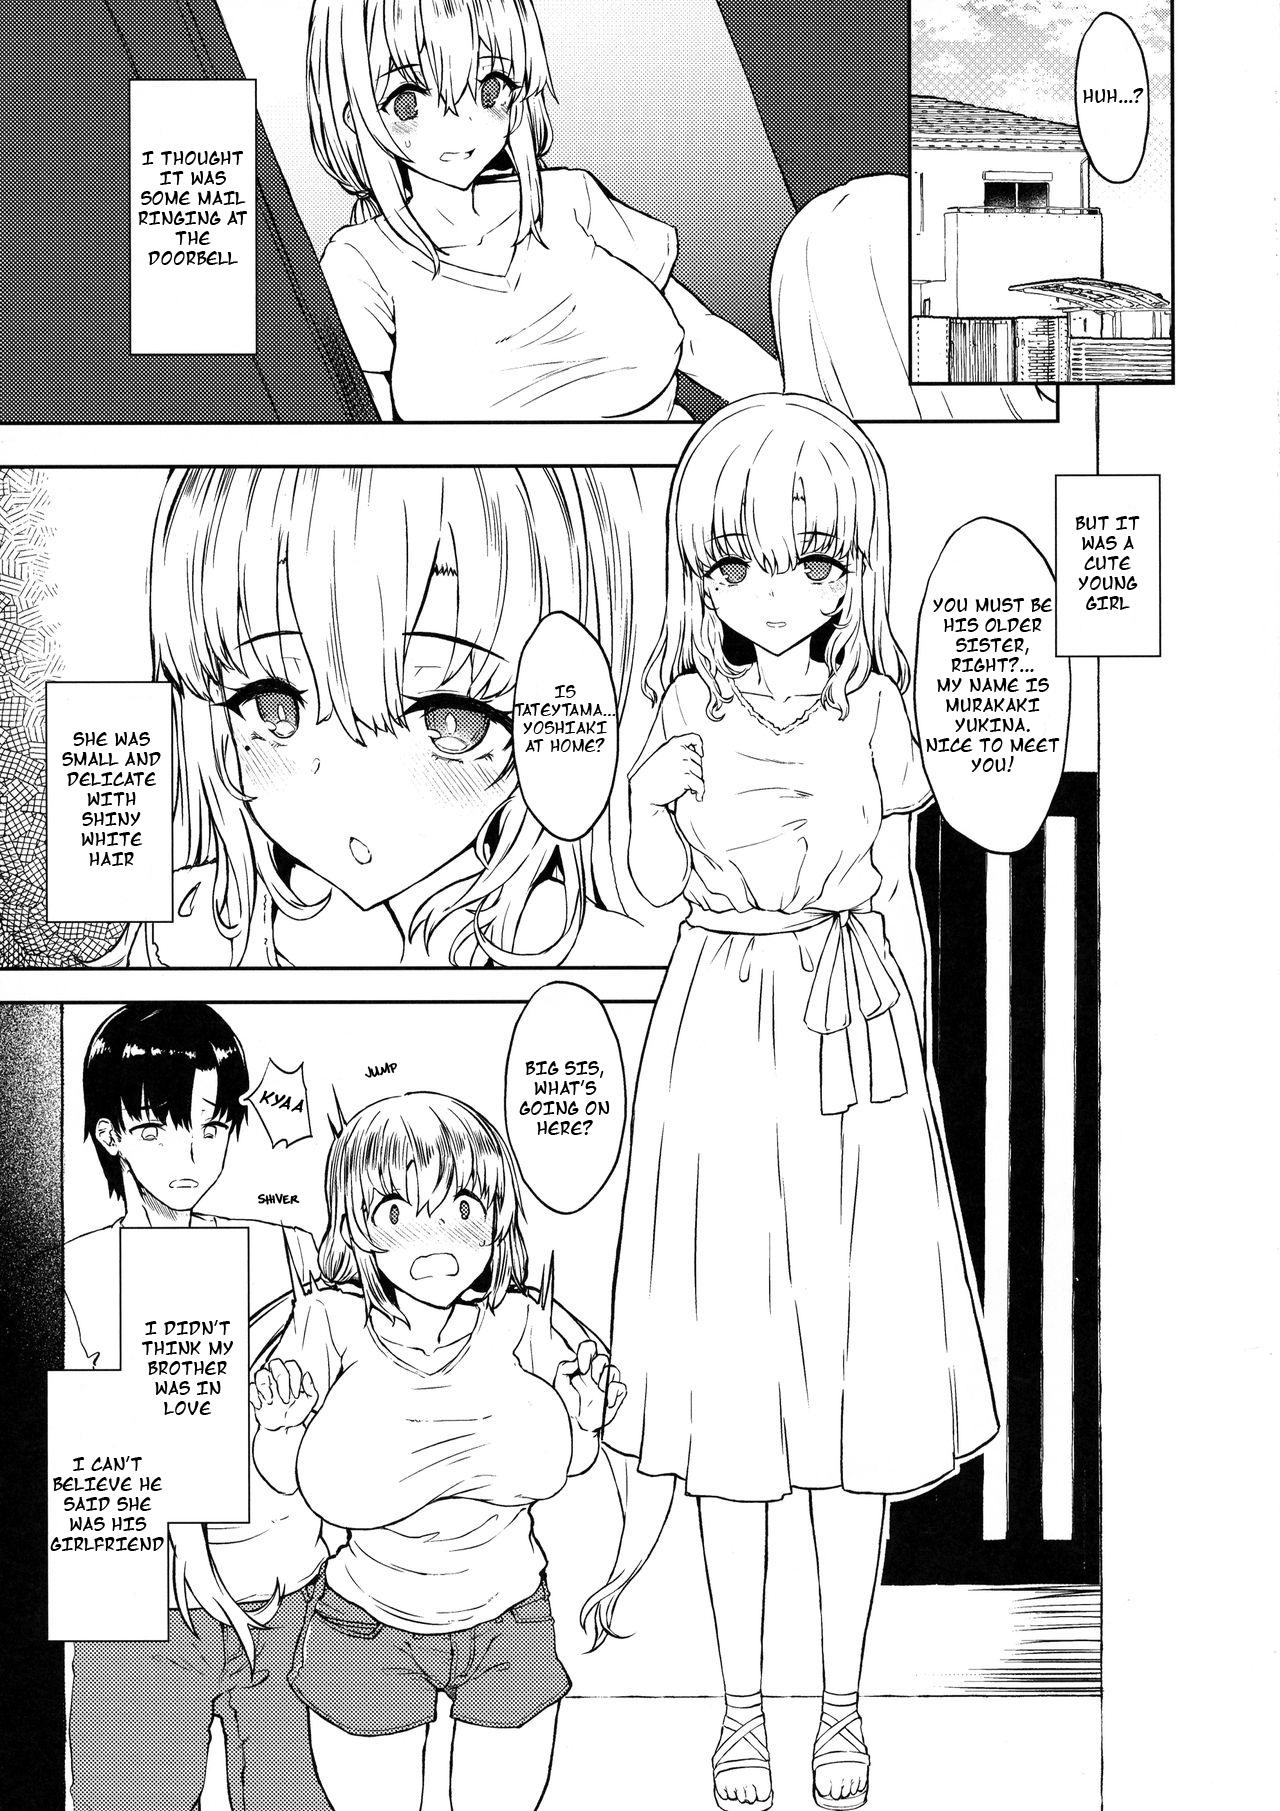 Otouto no Kanojo | My Younger Brother's Girlfriend 4